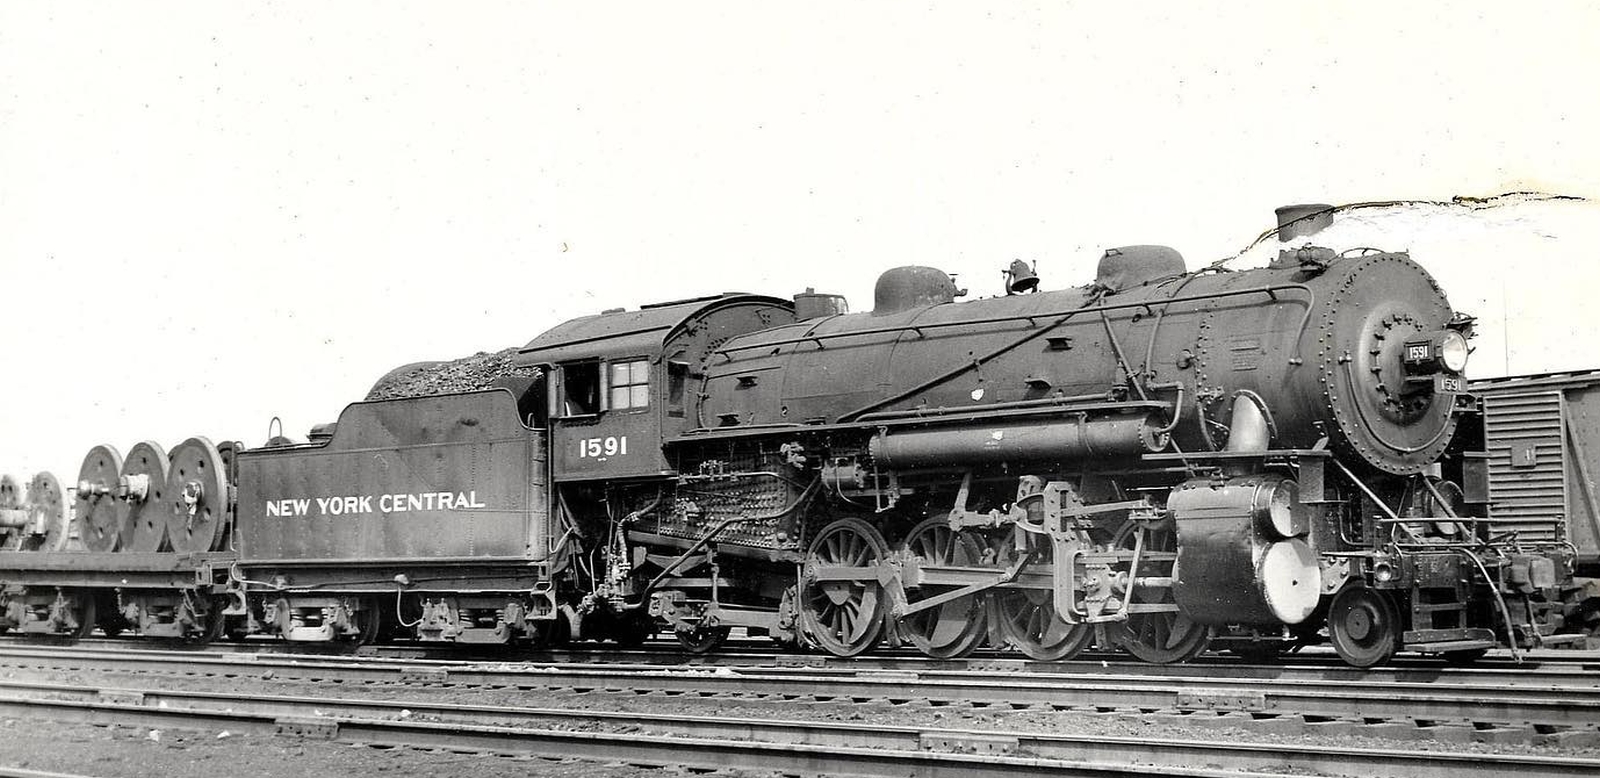 H-5p No. 1591 in the year 1946 in Collinwood, Ohio